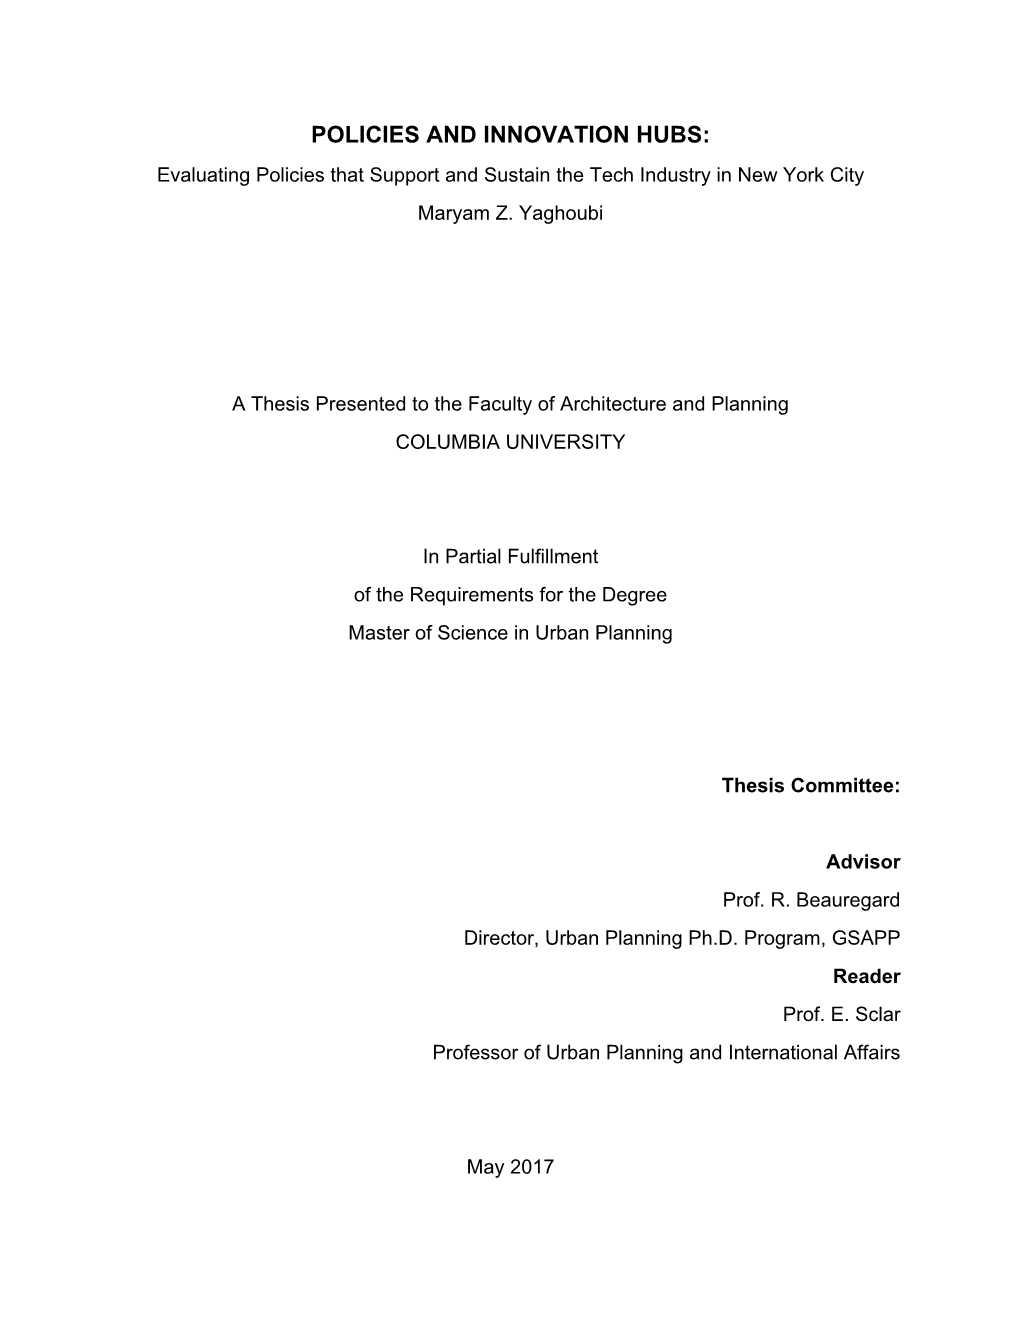 POLICIES and INNOVATION HUBS: Evaluating Policies That Support and Sustain the Tech Industry in New York City Maryam Z